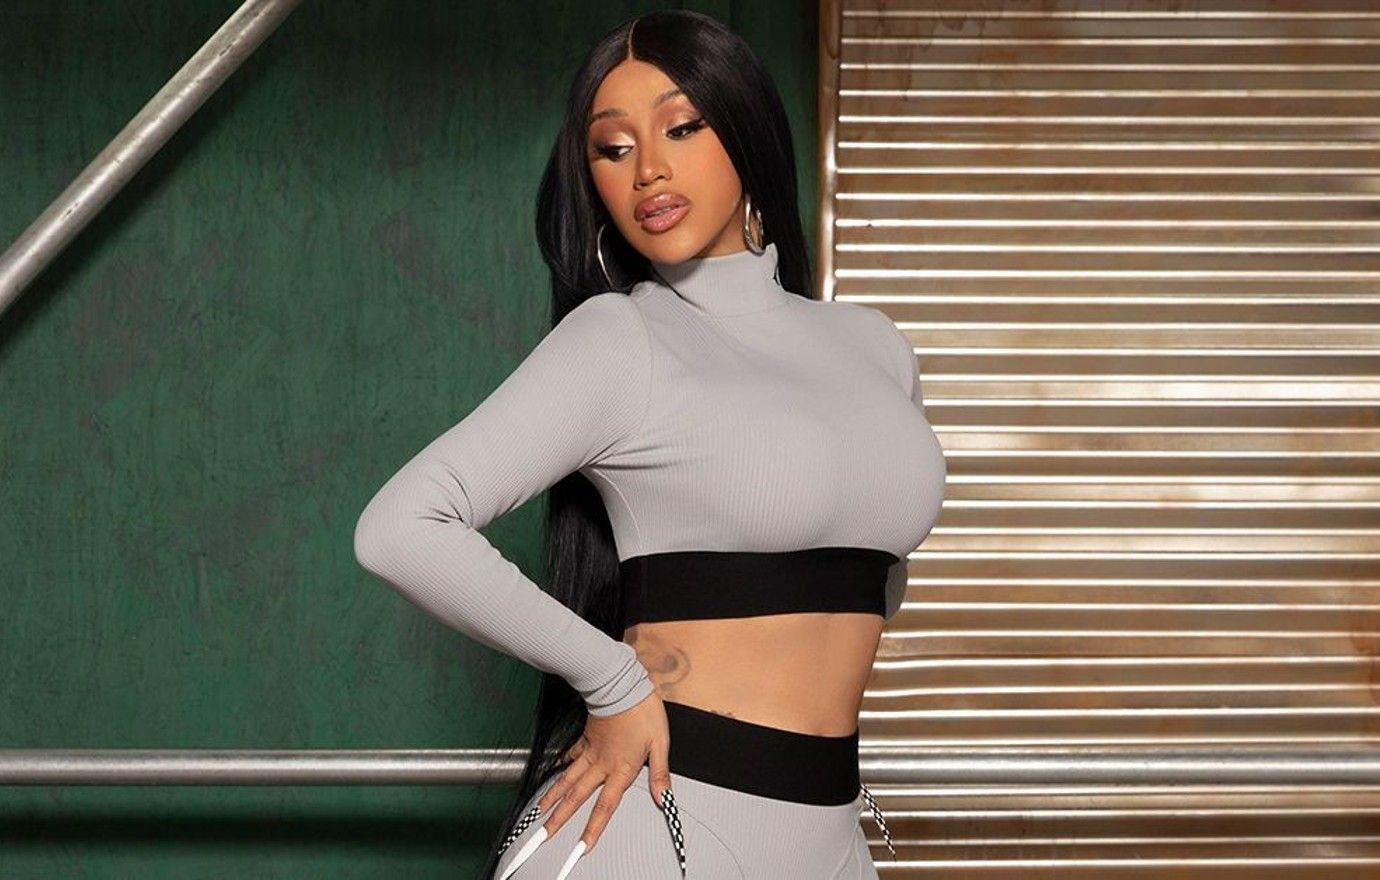 Cardi B nearly suffers a nip slip in racy photo as she poses naked